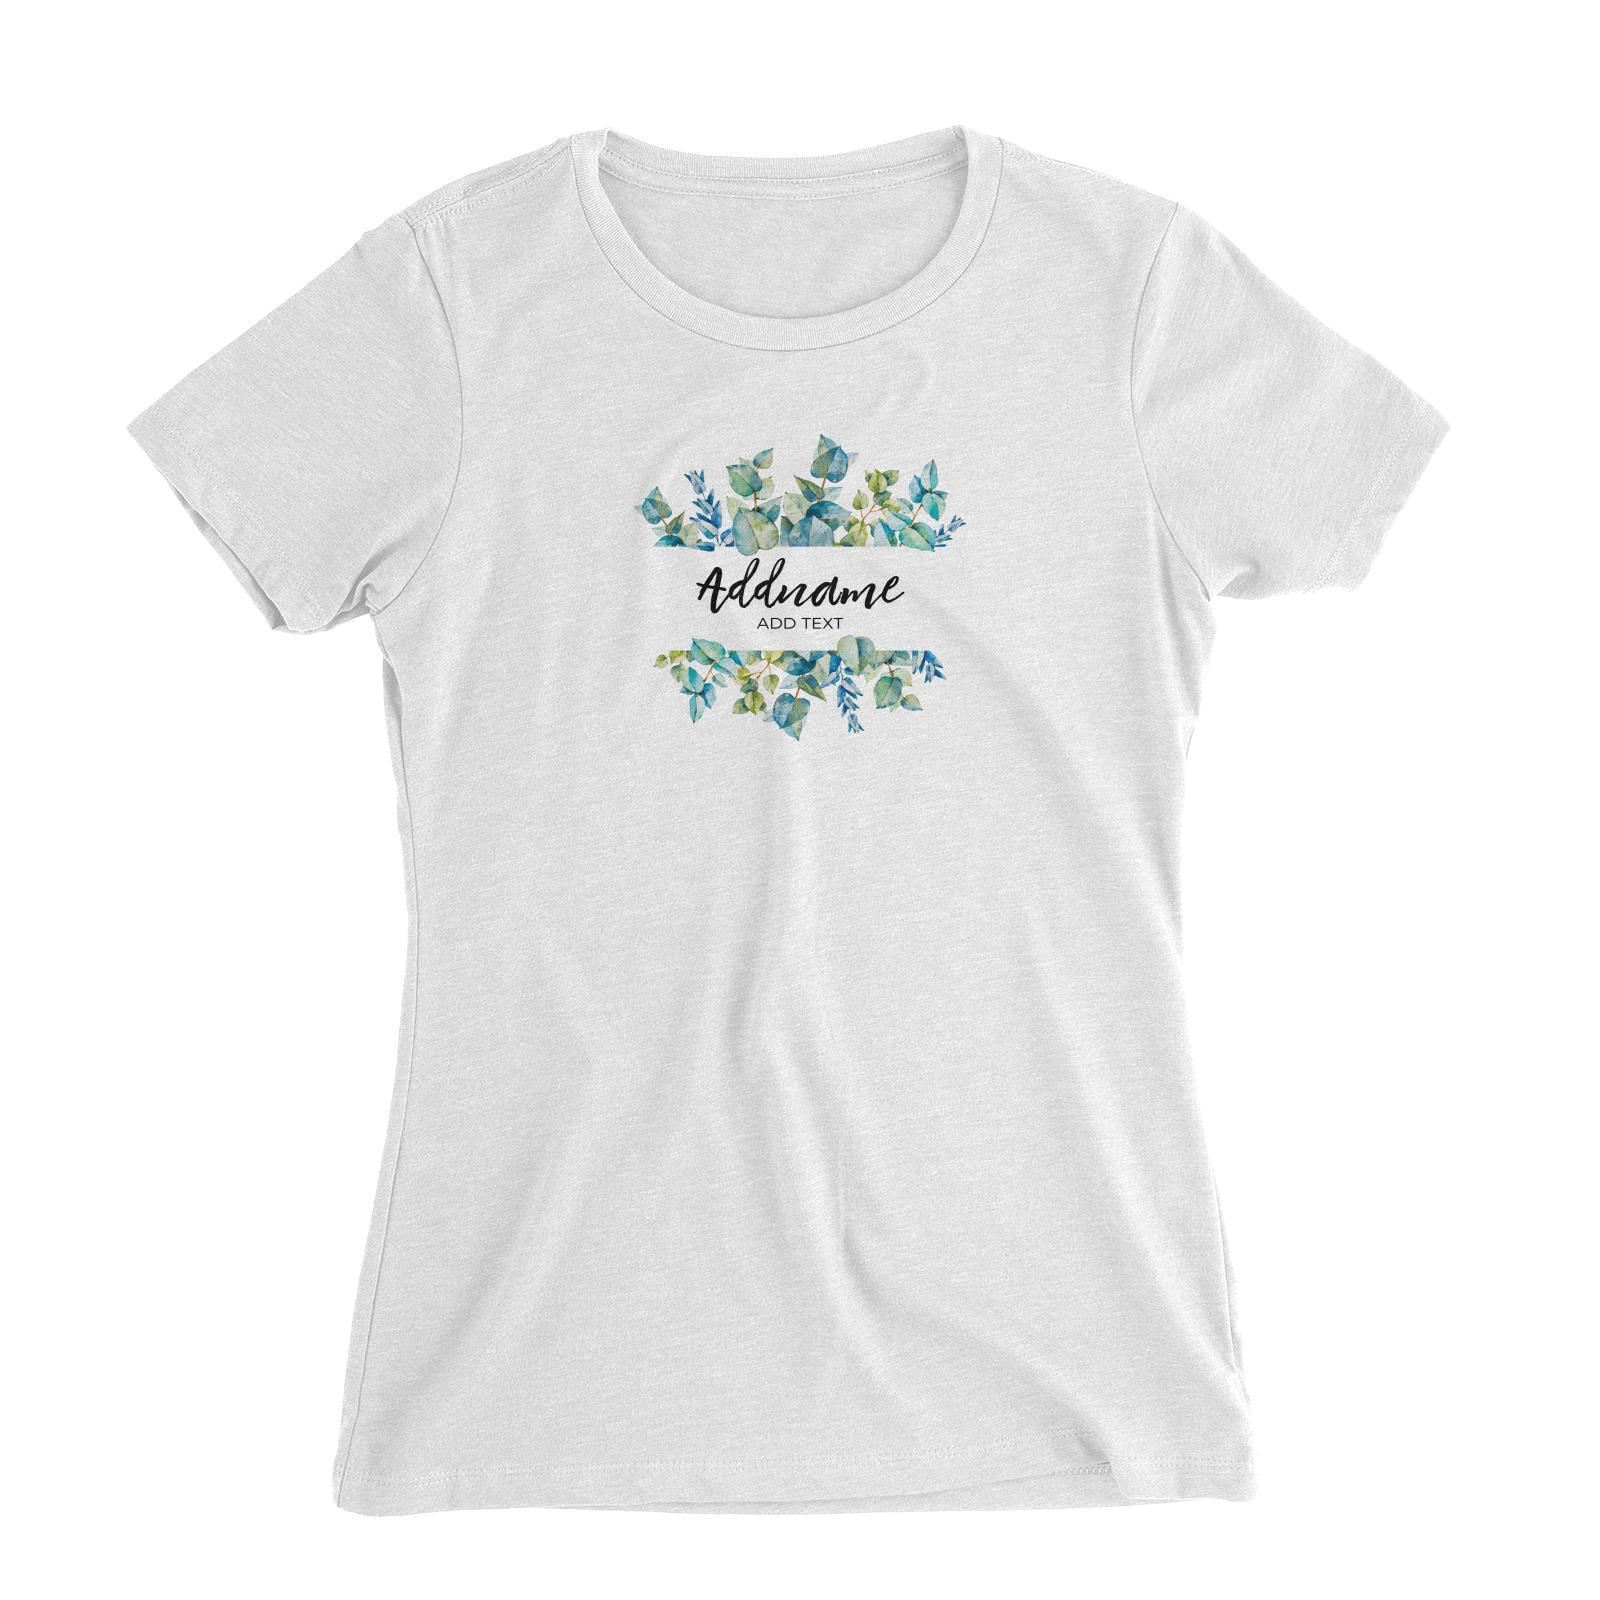 Add Your Own Text Teacher Blue Leaves Box Addname And Add Text Women's Slim Fit T-Shirt